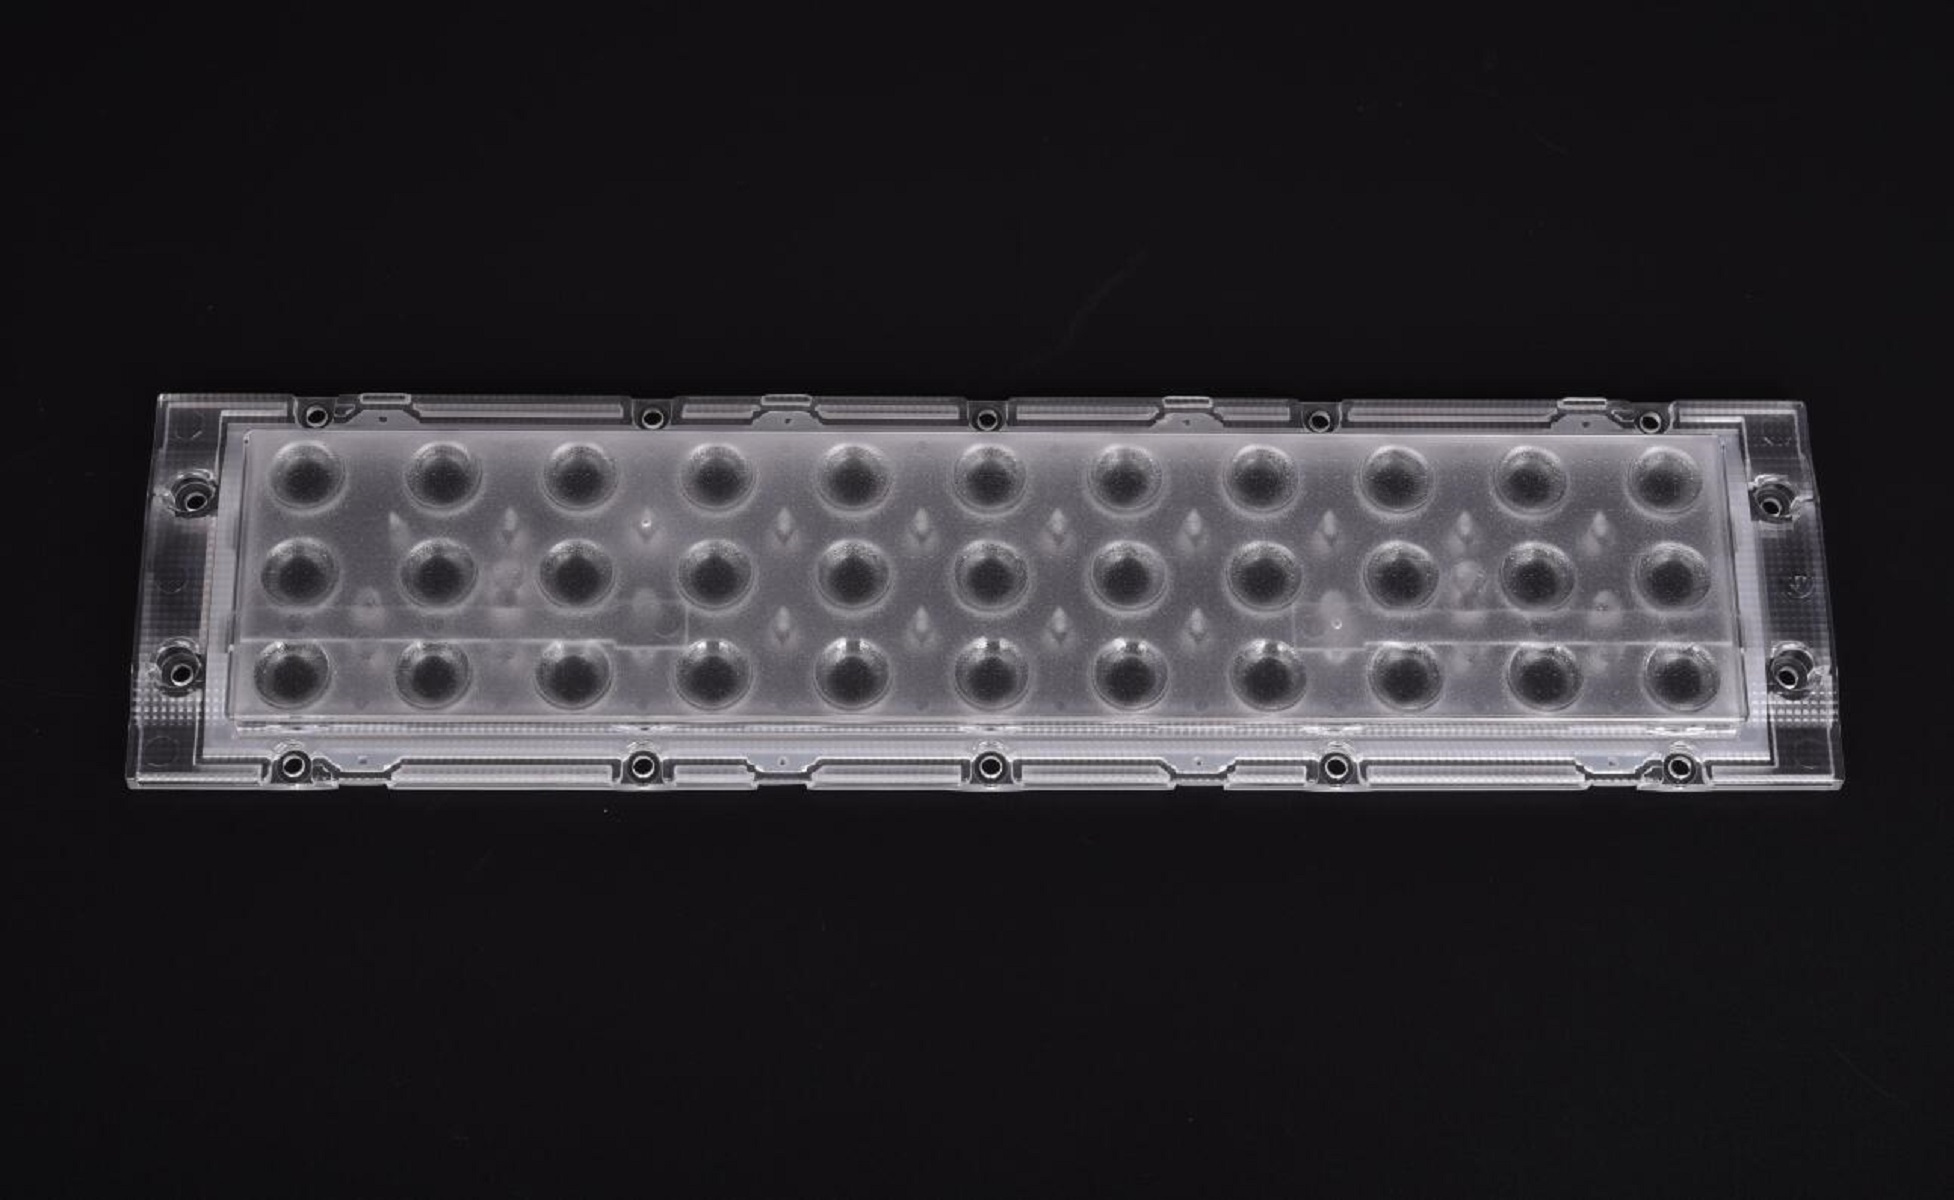 3x11 lens array 60° with IP66 protection and for IK08 test